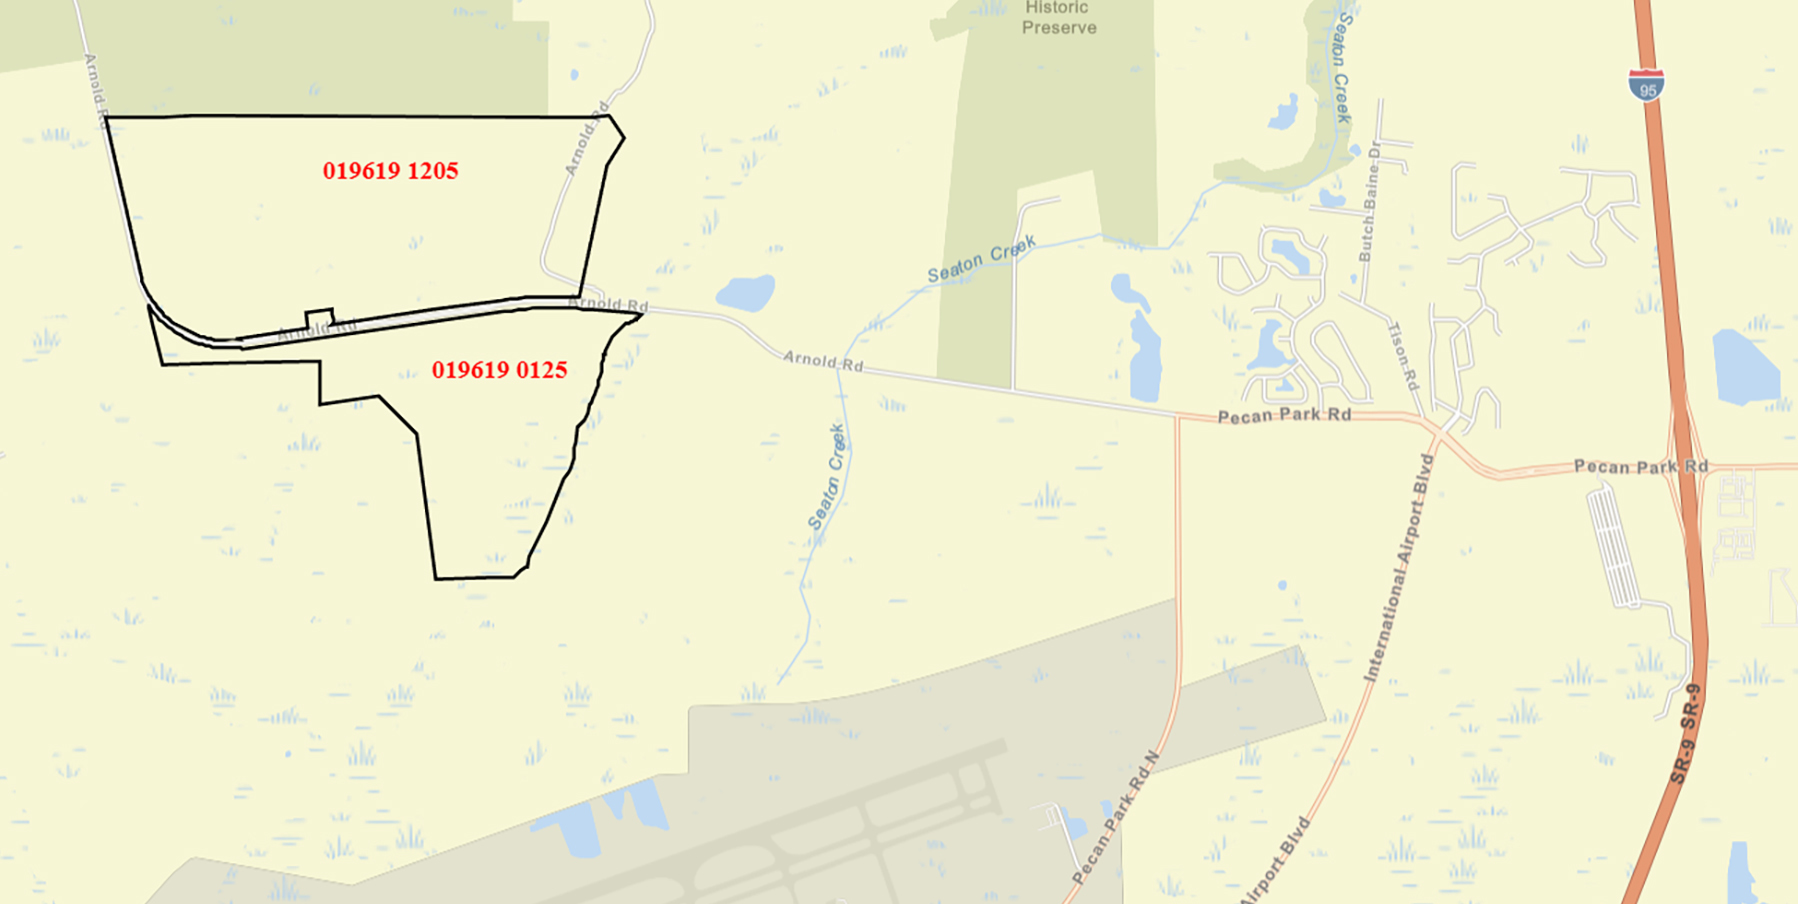 The property is North of Jacksonville International Airport and west of Interstate 95.